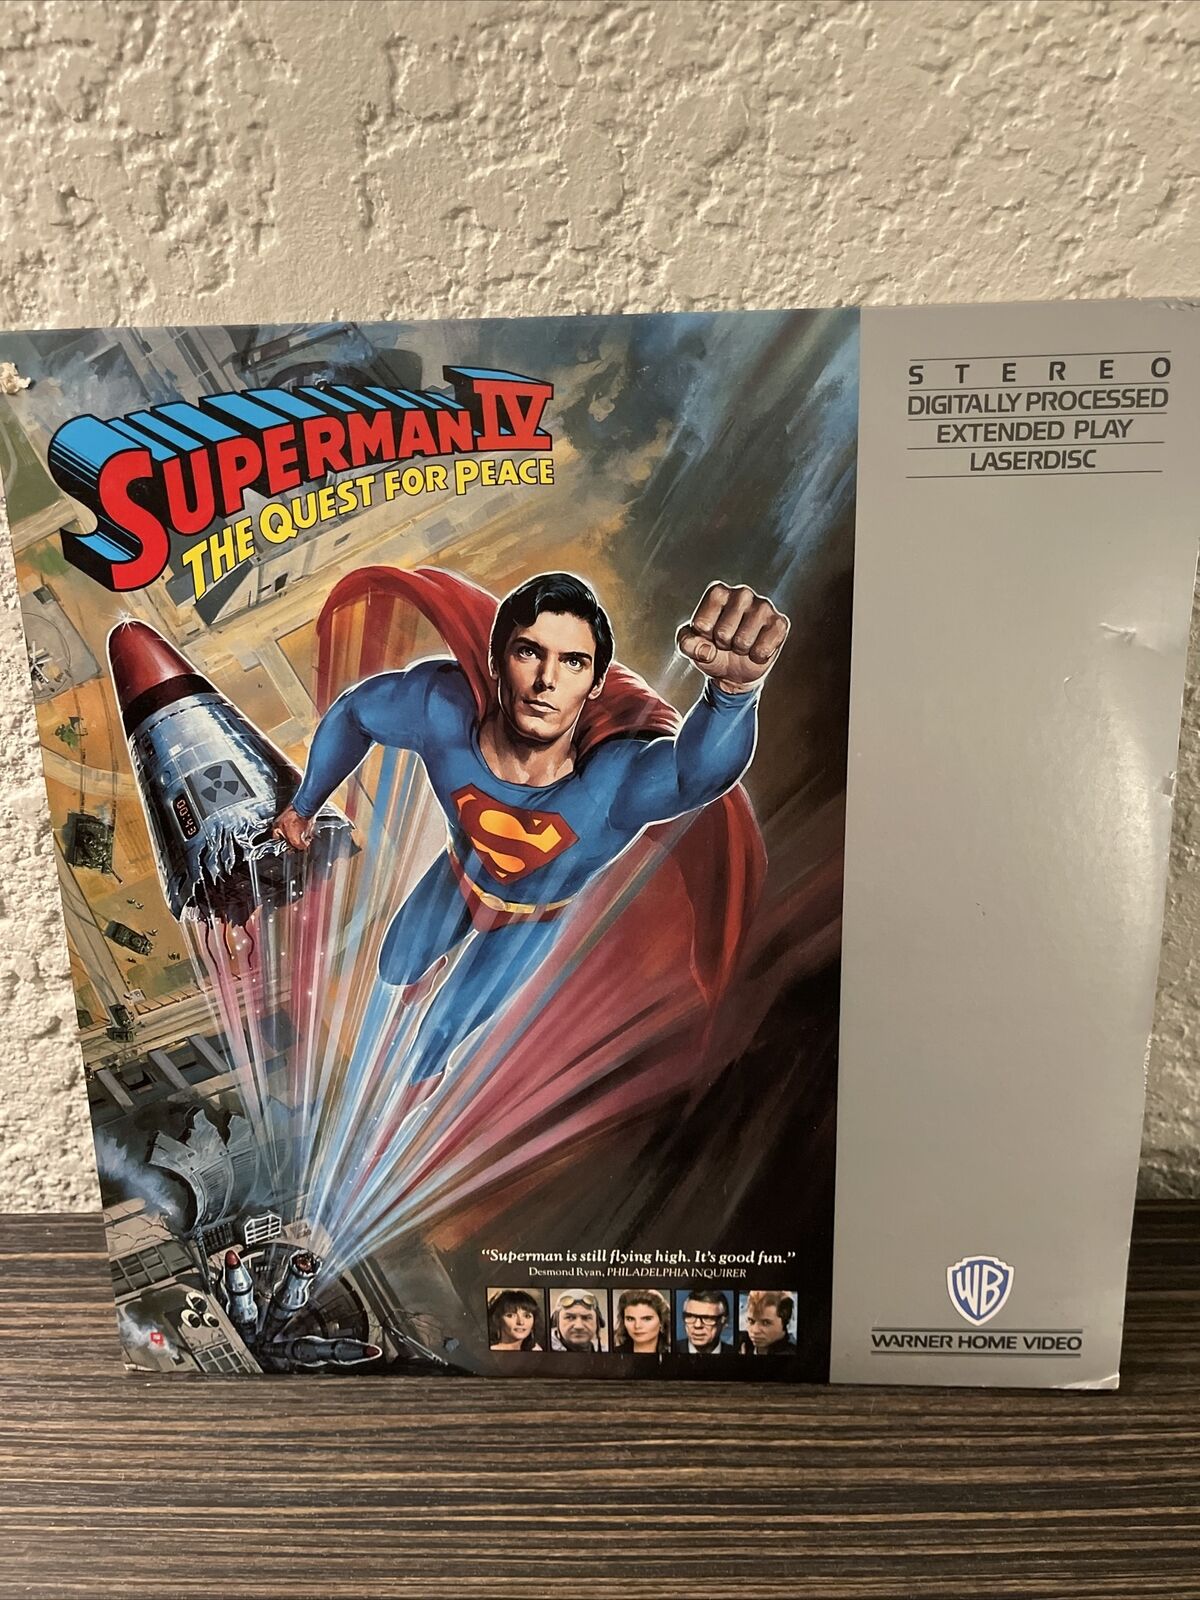 Superman IV: The Quest For Peace - Darkside Records